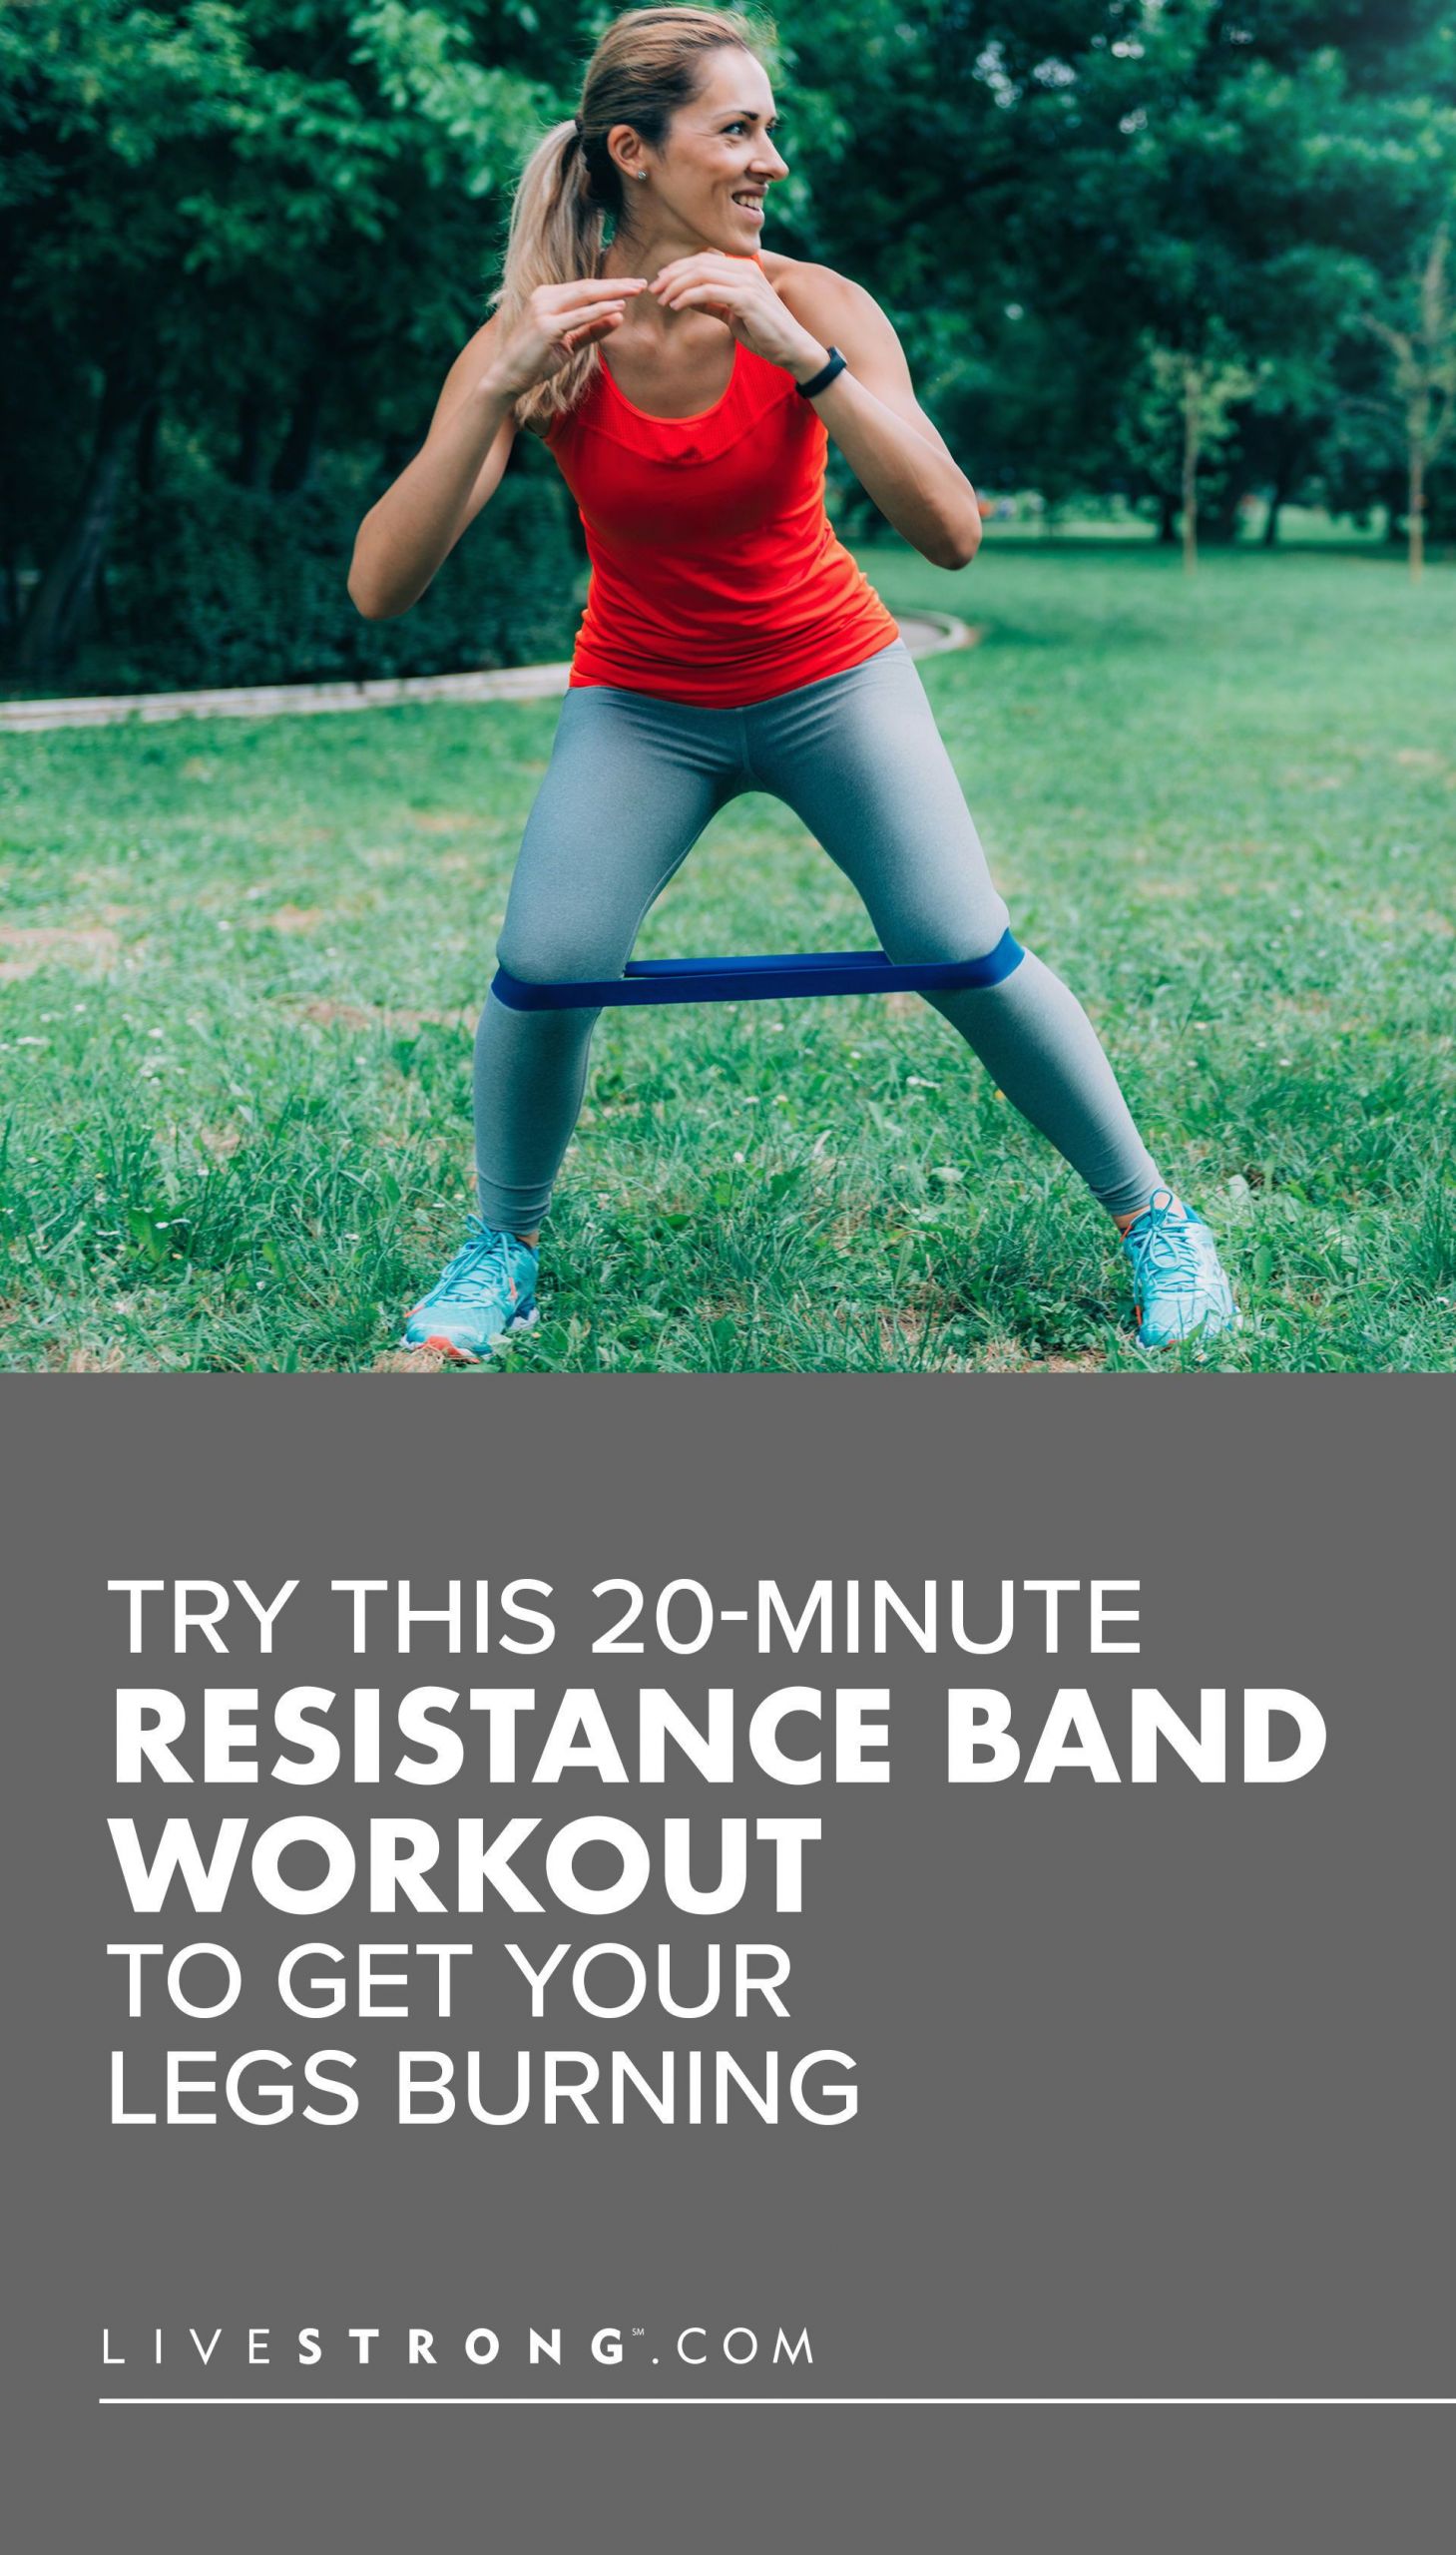 How To Lose Weight In Your Legs Fast
 All You Need Is a Resistance Band to Get Your Legs Burning